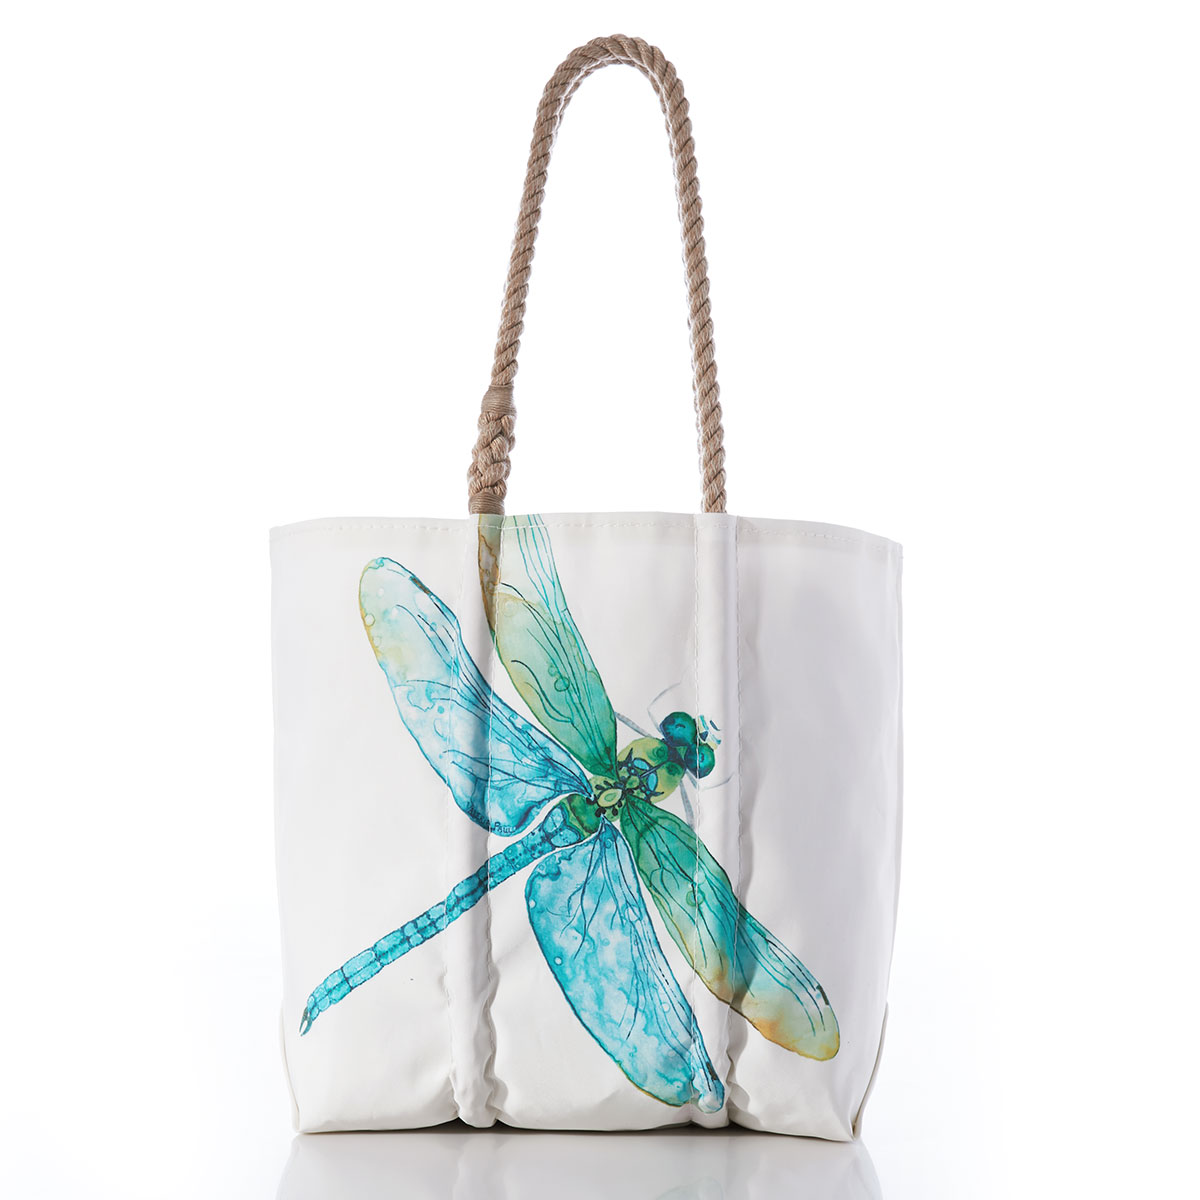 a dragonfly in light shades of blues and greens flies across a white recycled sail cloth tote with hemp rope handles